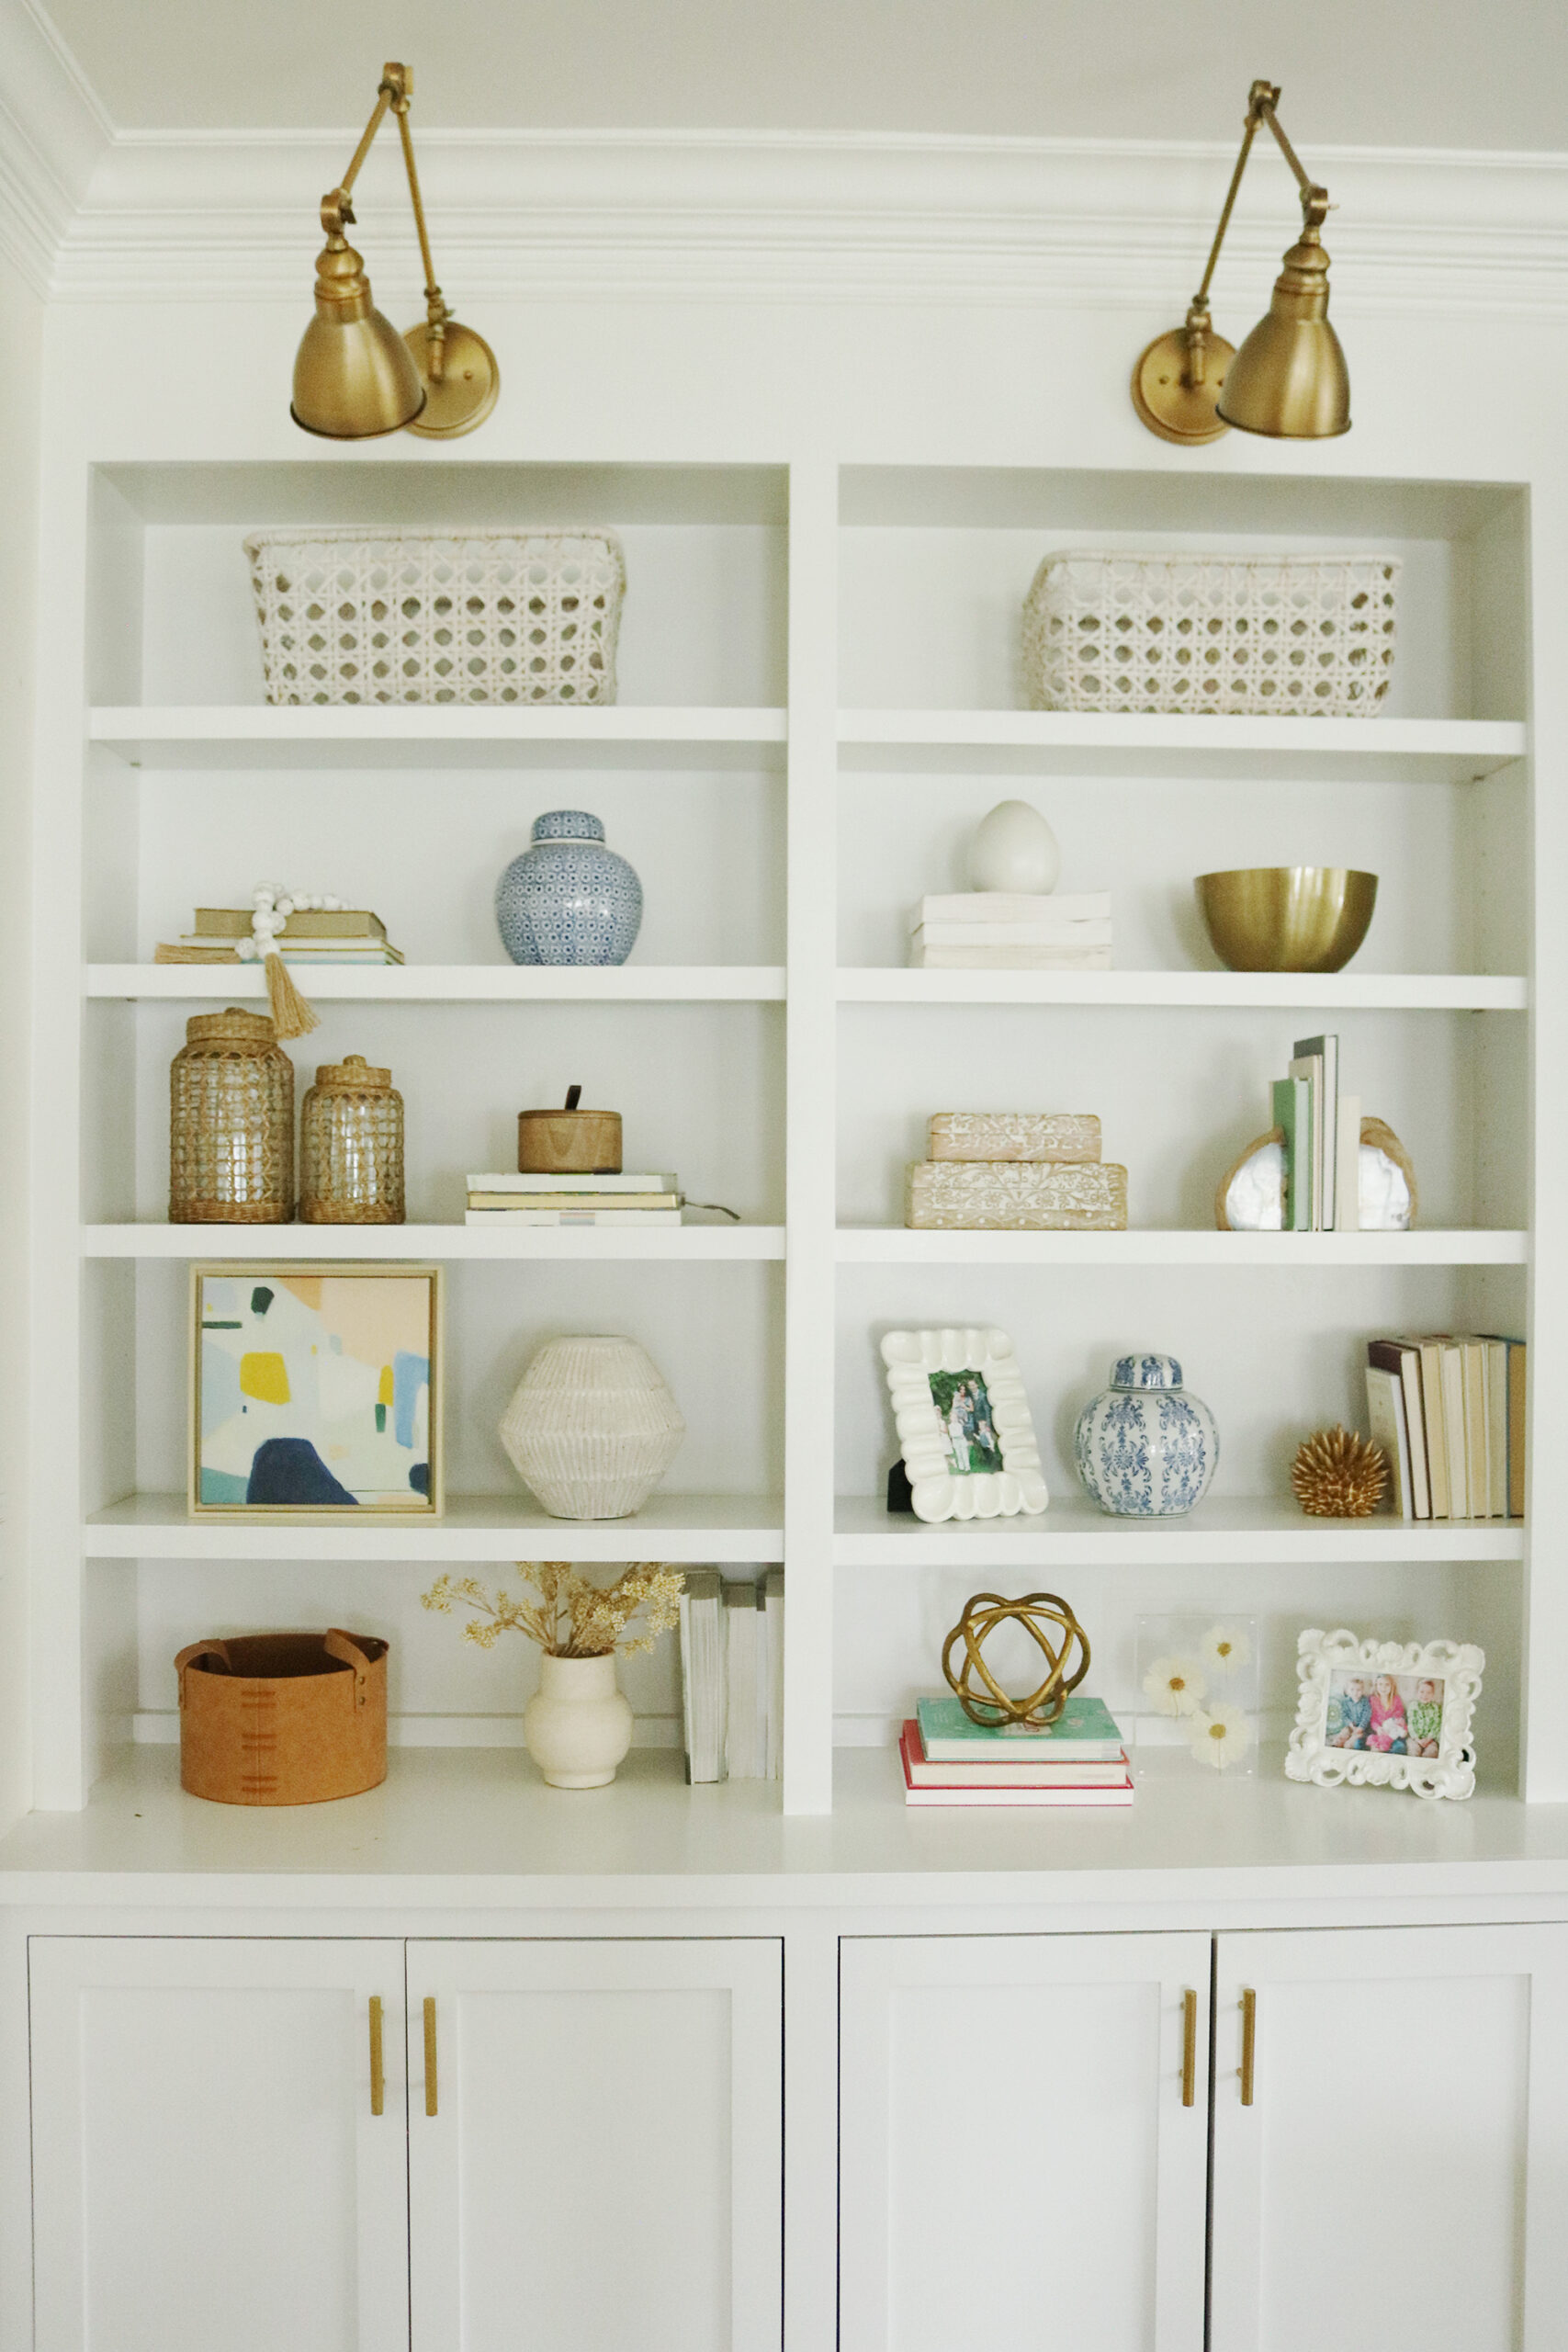 Giving my Built-Ins a Bookshelf Refresh with A New Styled Look while styling it with new items and repurposing old decor items to save. || Darling Darleen Top Lifestyle CT Blogger